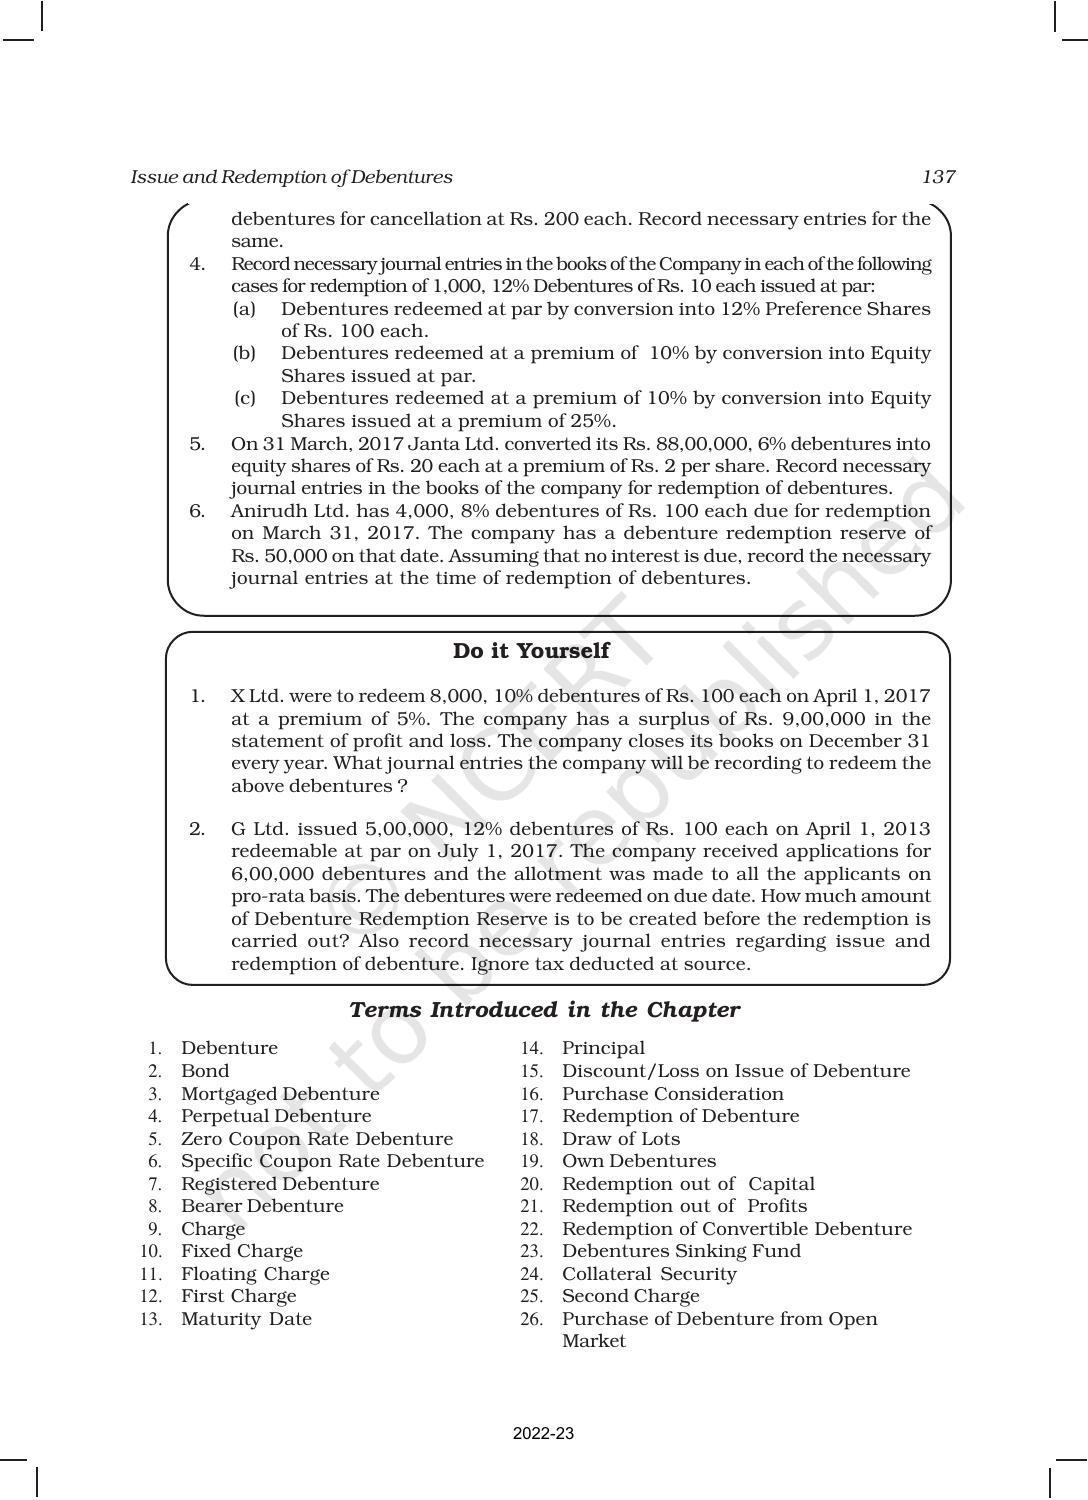 NCERT Book for Class 12 Accountancy Part II Chapter 1 Issue and Redemption of Debentures - Page 63